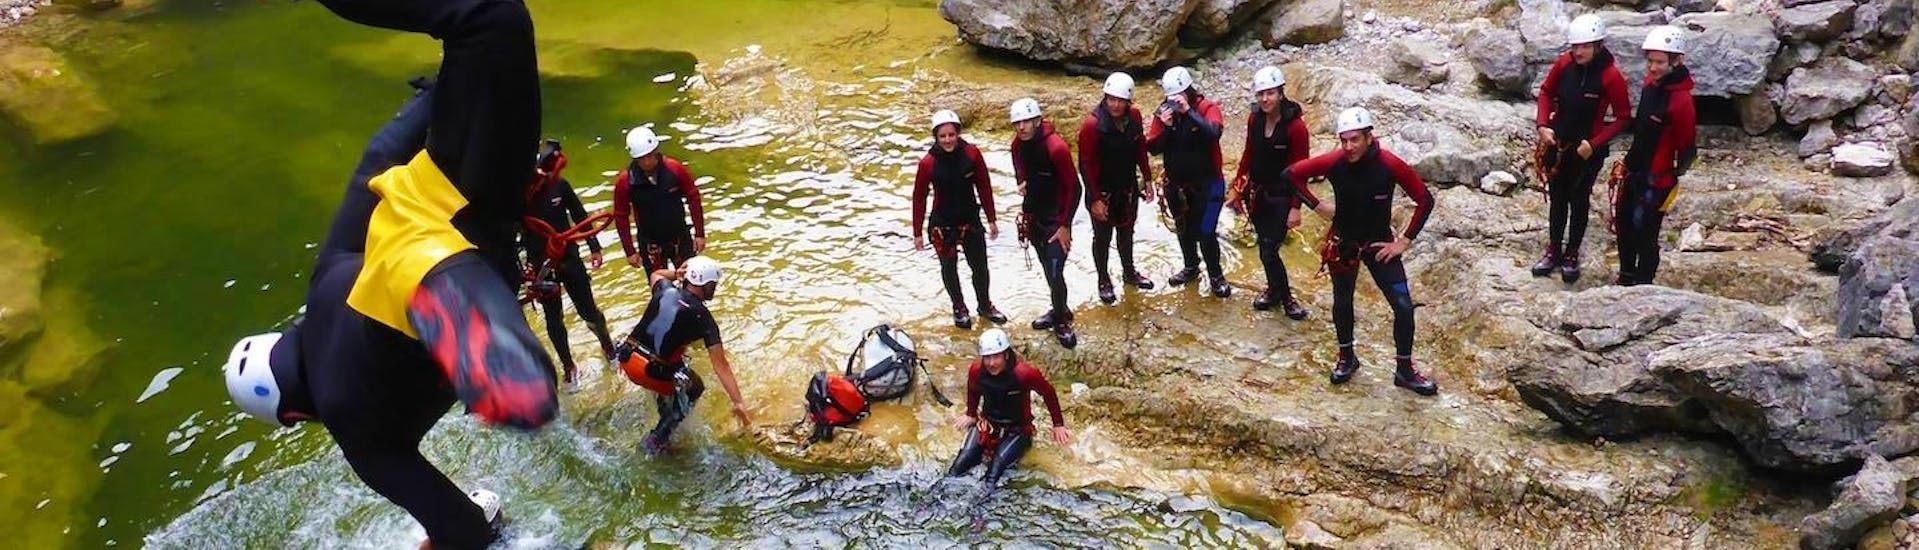 Canyoning & Rafting - Adventure Weekend in Schneizlreuth.